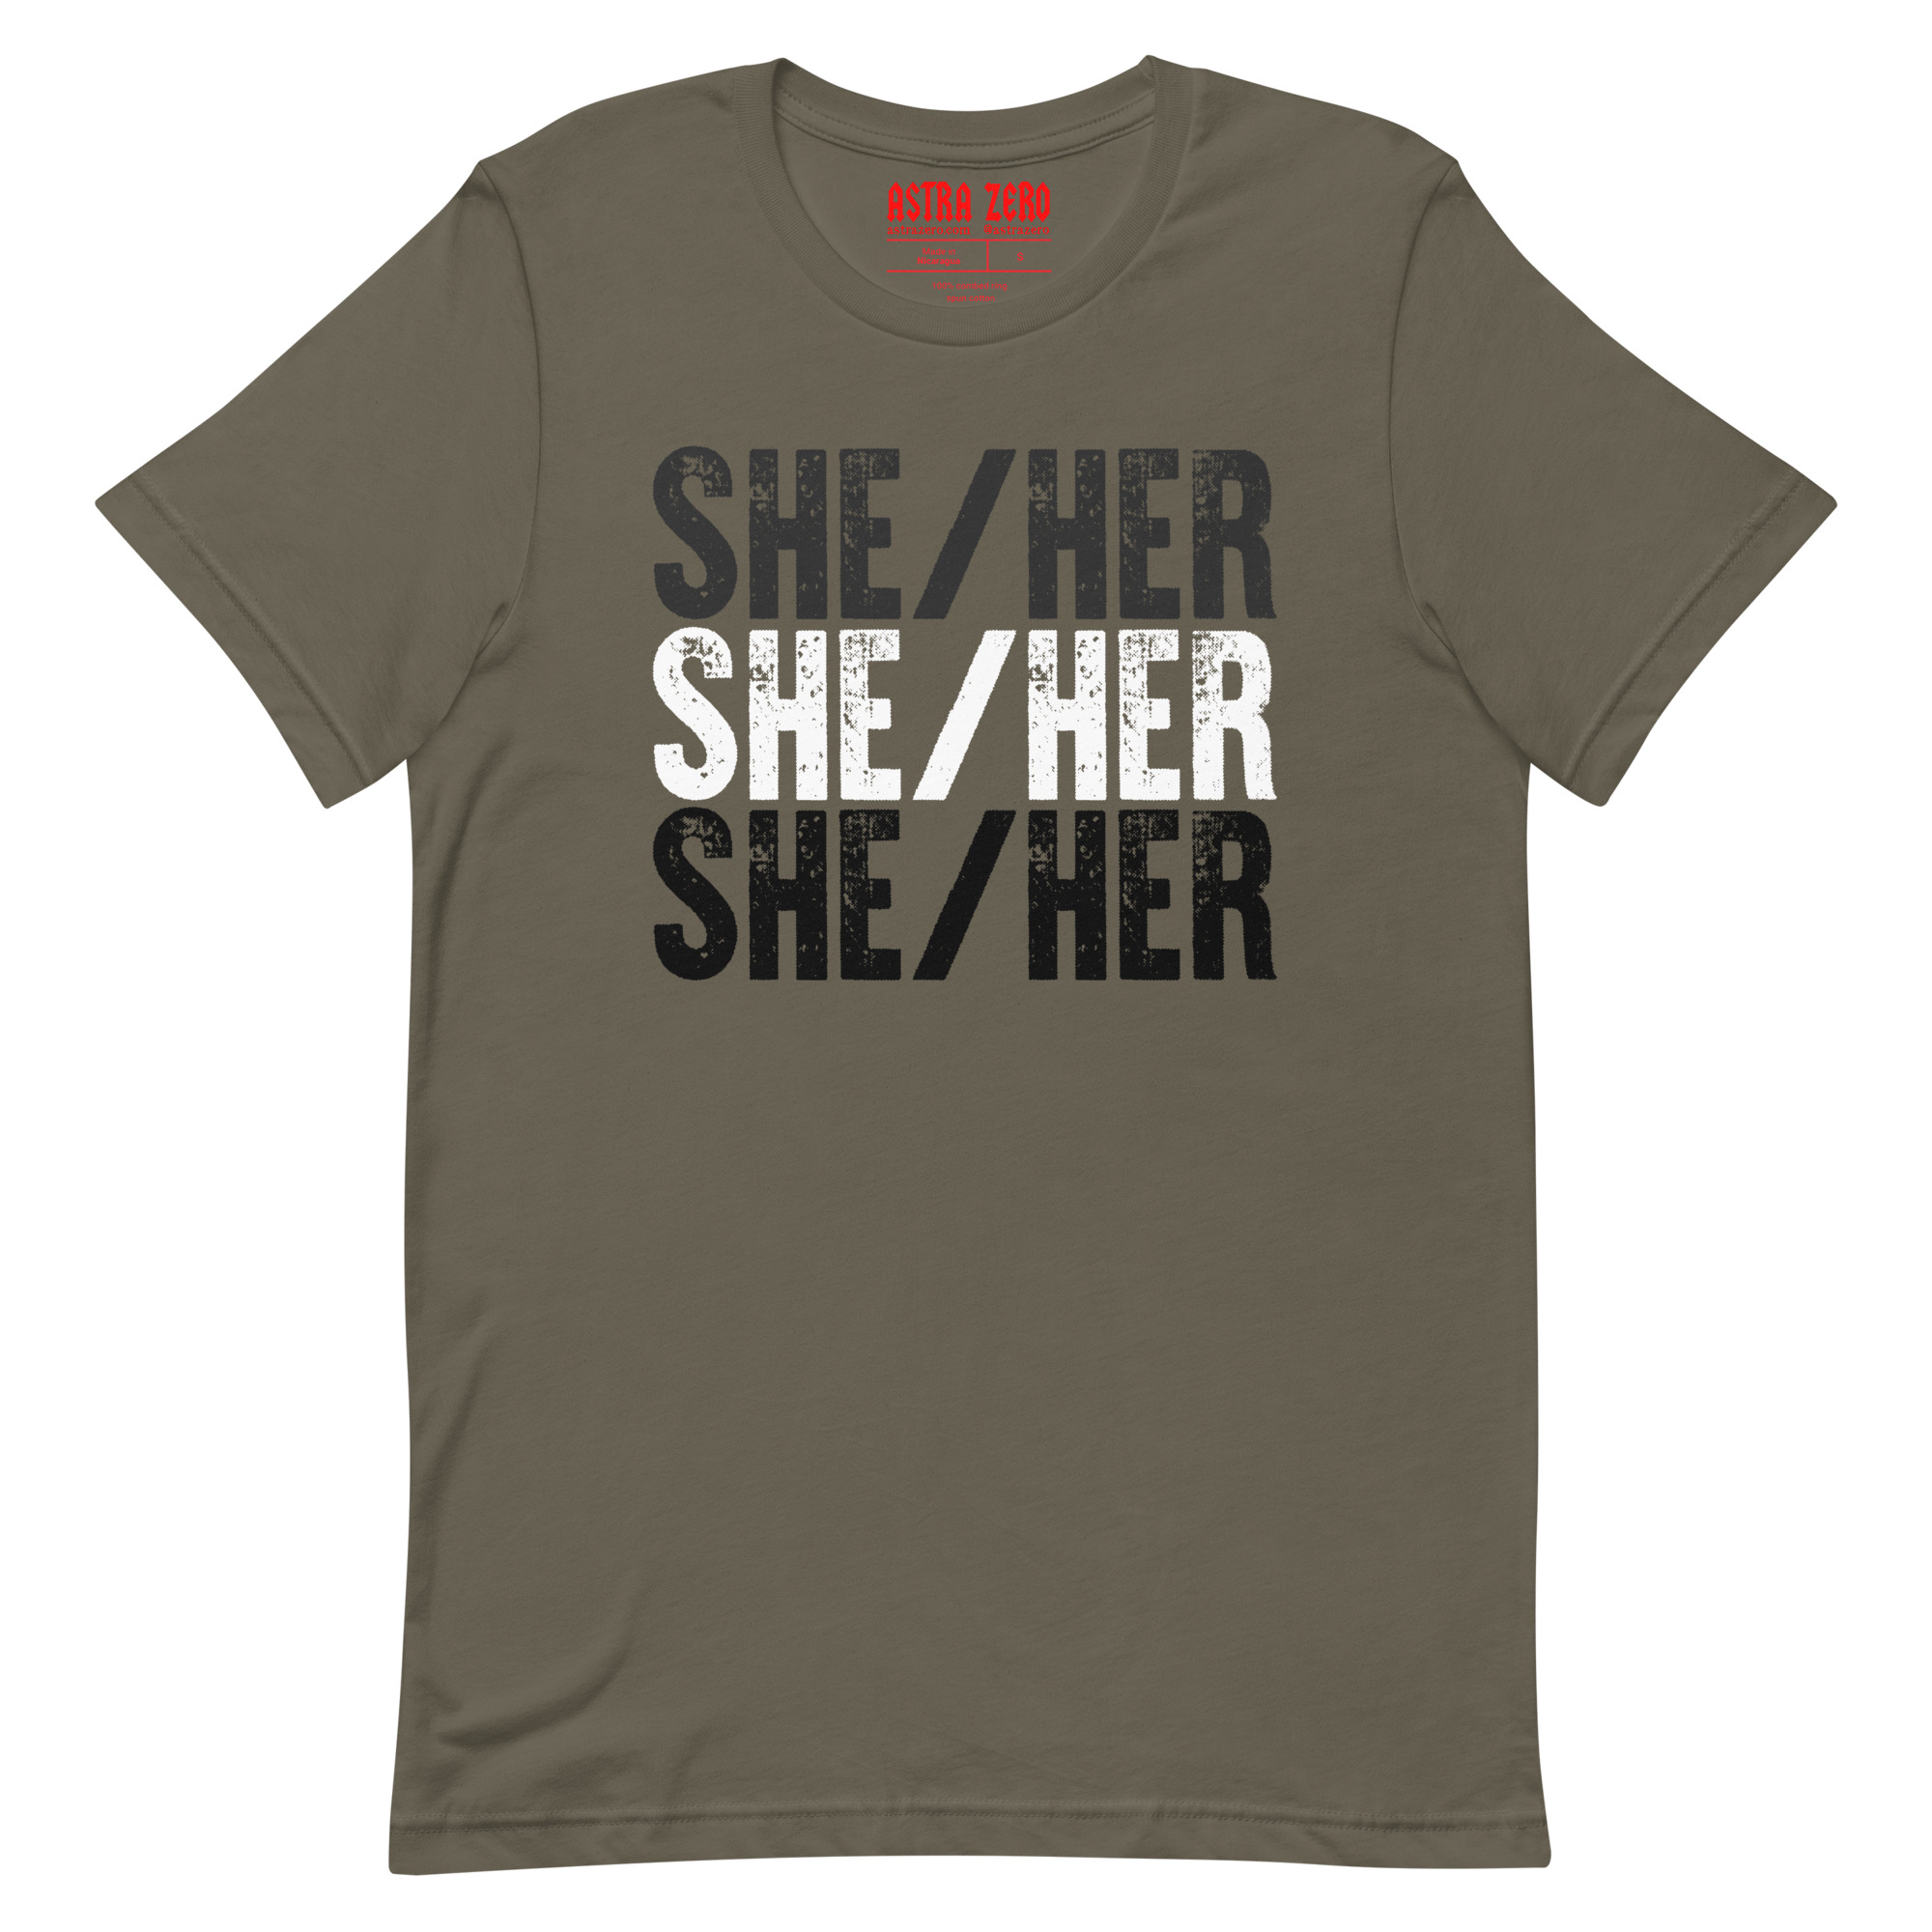 Featured image for “SHE / HER - Unisex t-shirt”